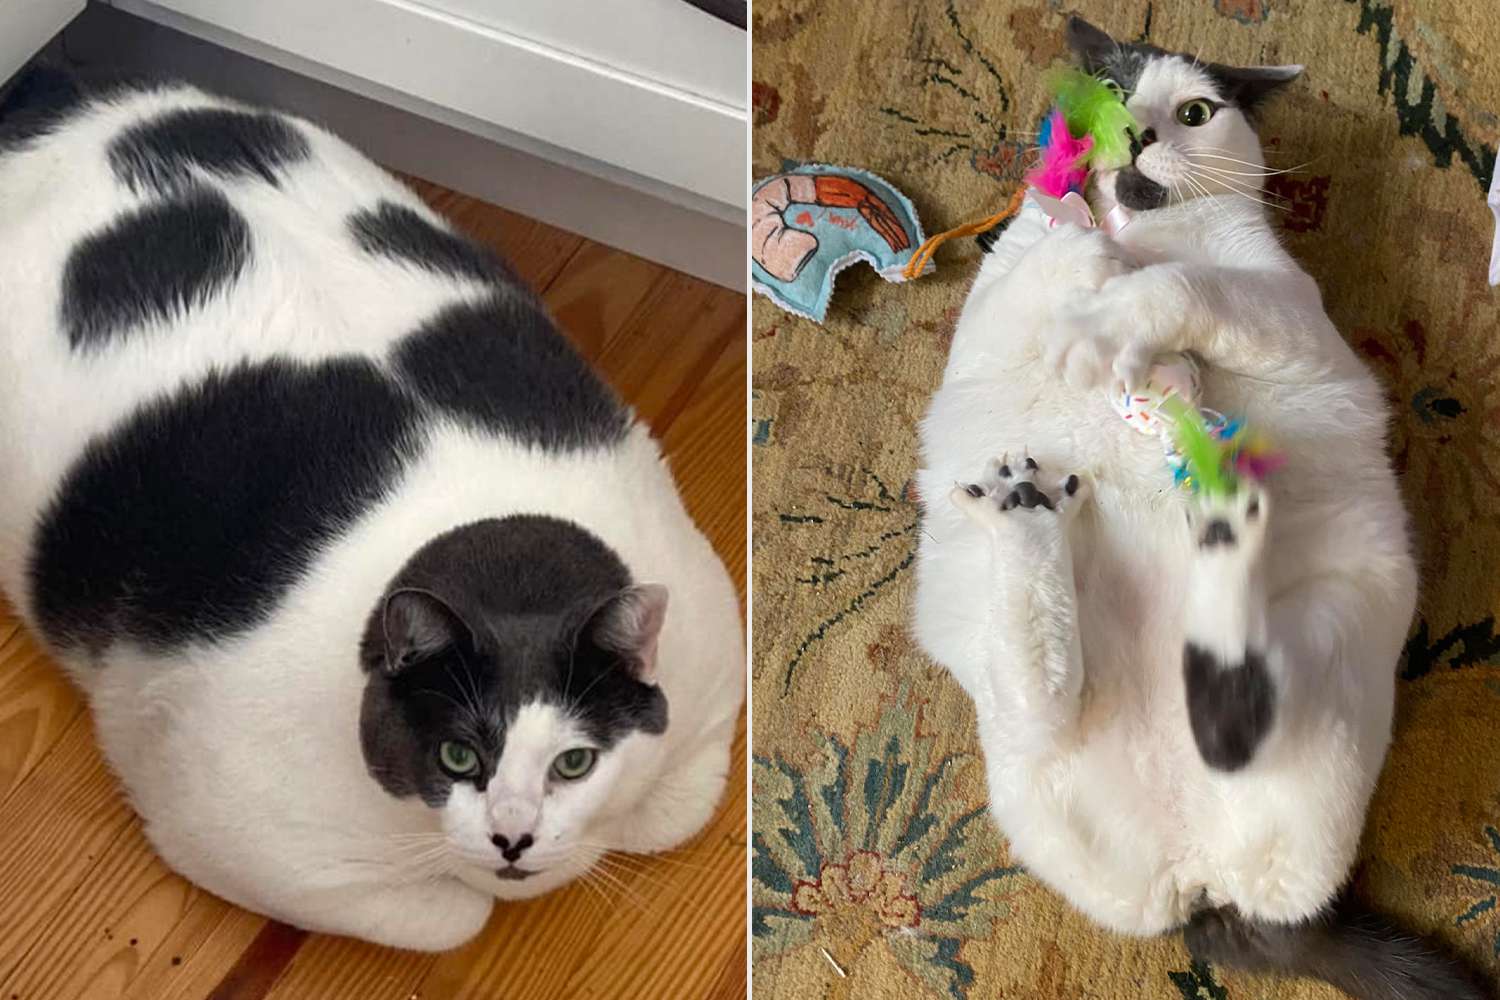 40-Lb. Rescue Cat Patches Down 15 Pounds One Year After His Adoption – See the Transformation! (Exclusive)